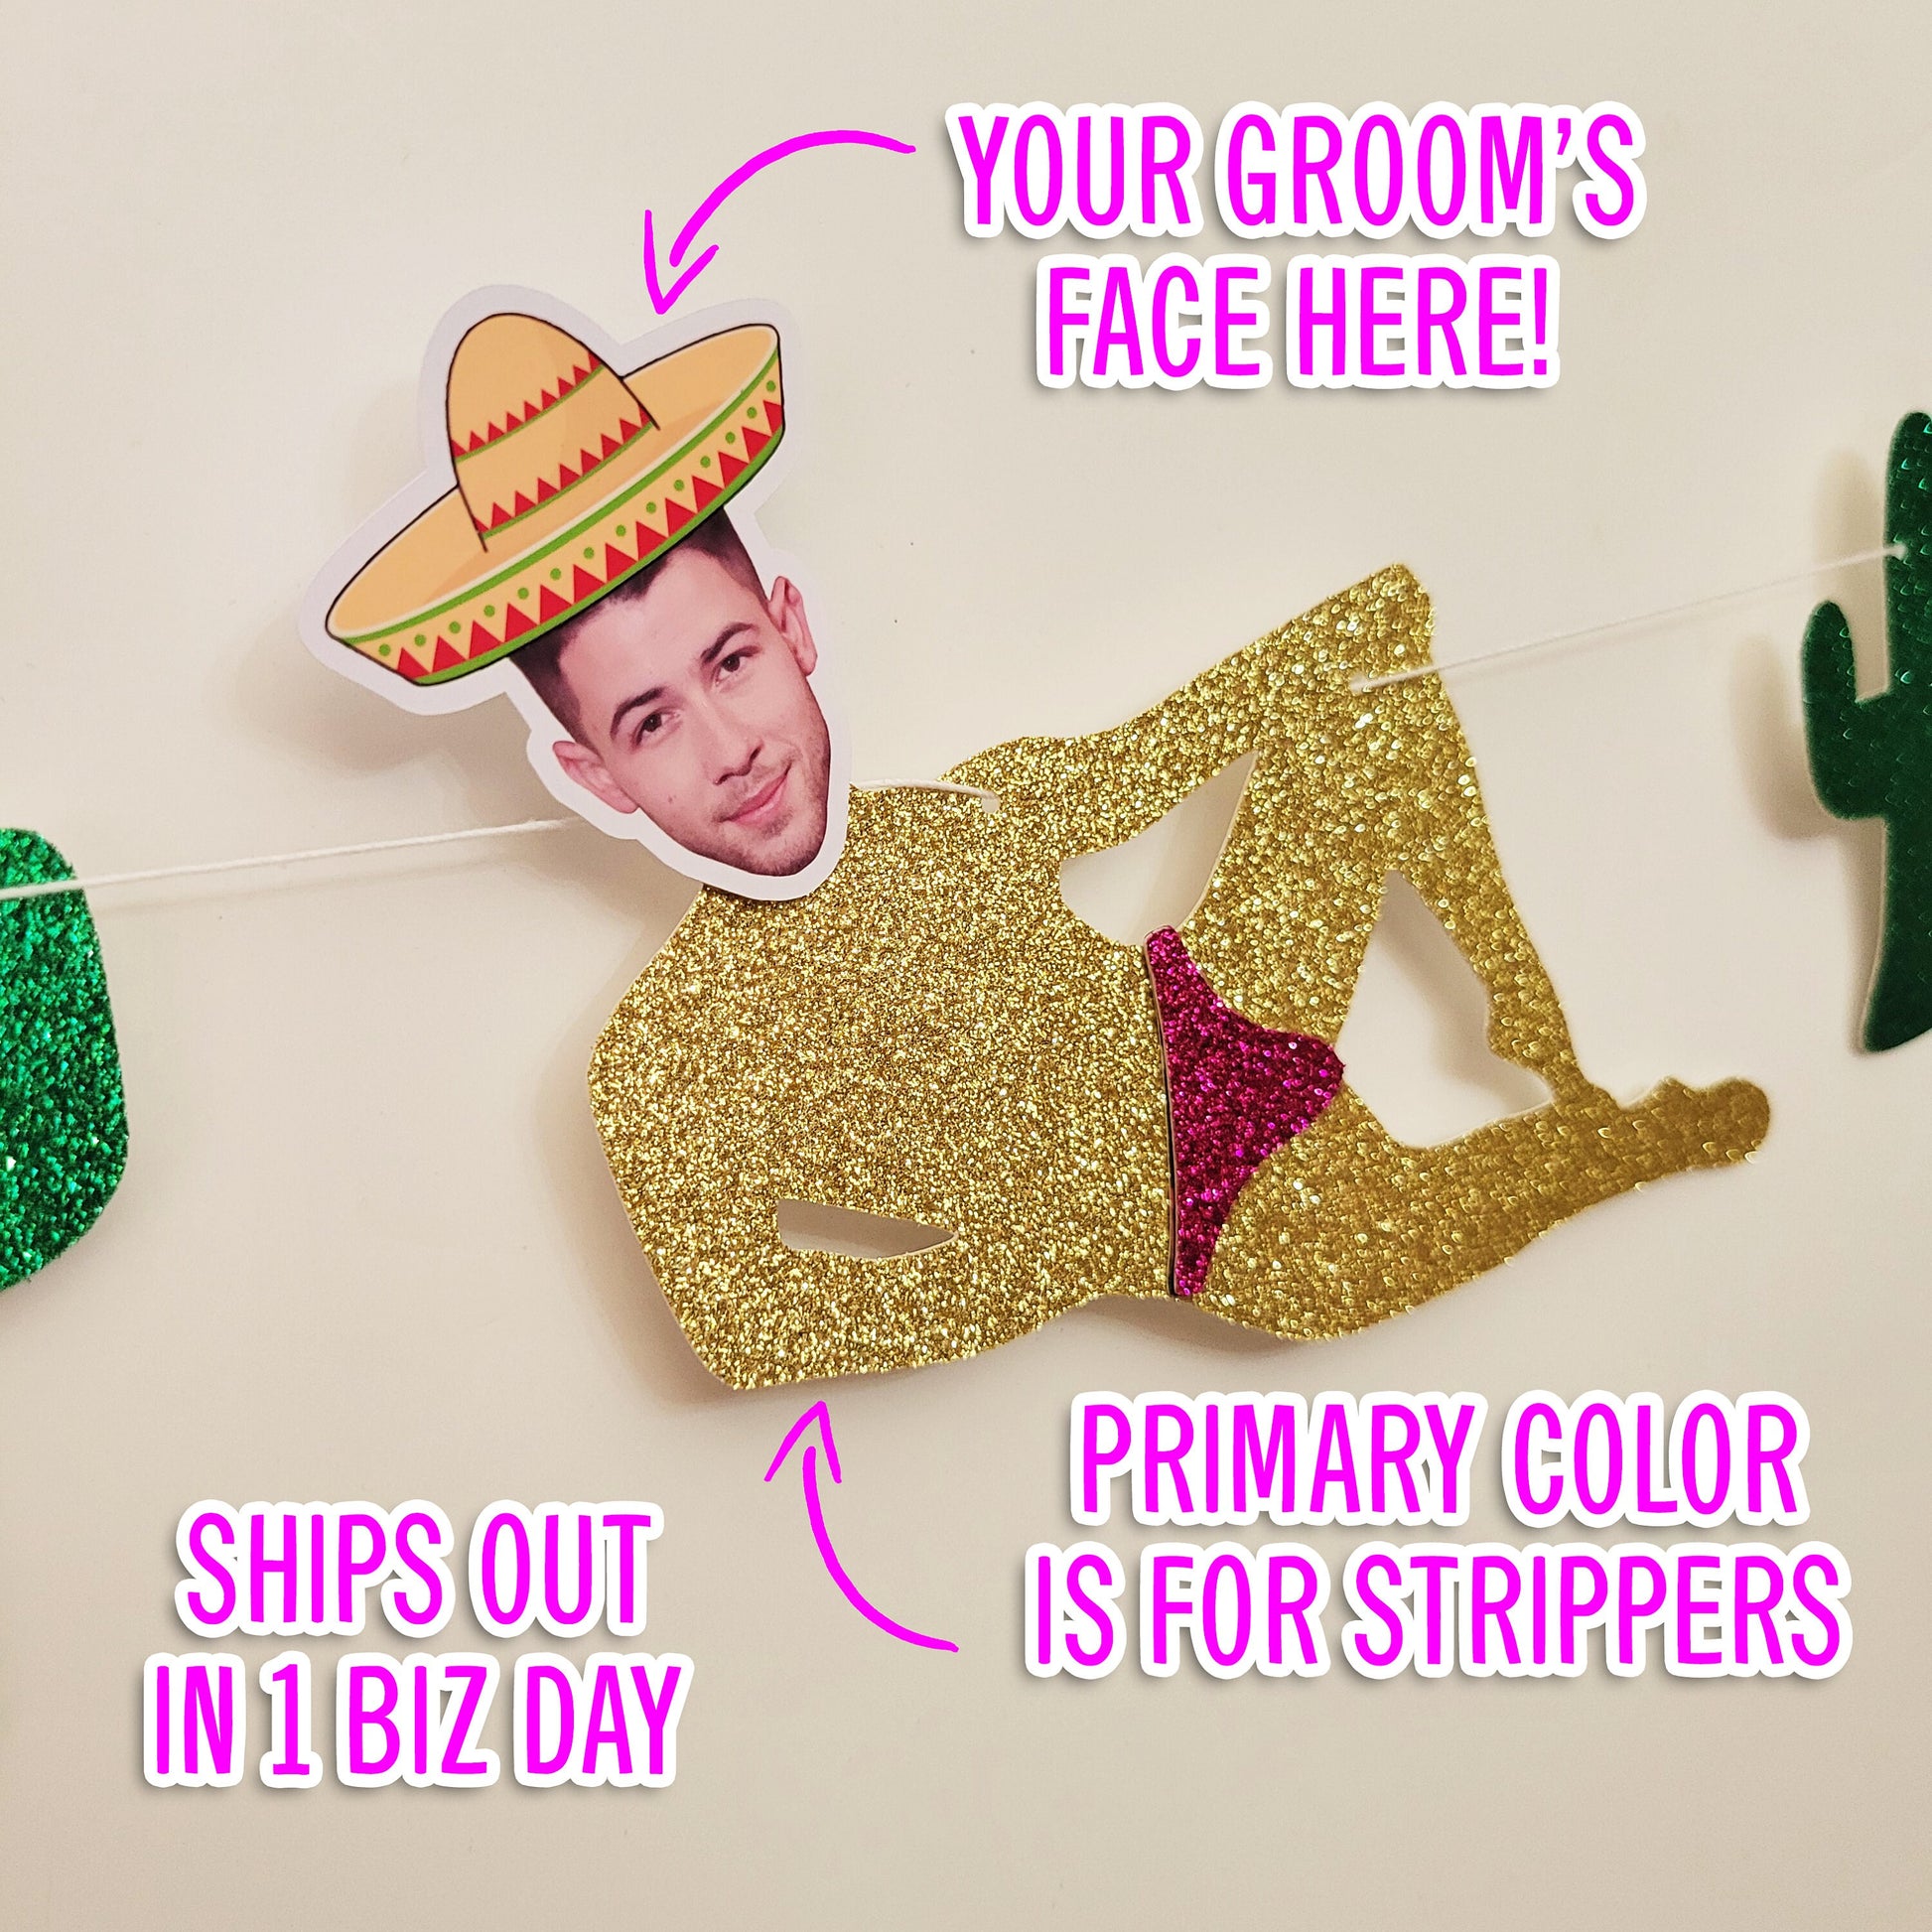 Final Fiesta Bachelorette Party Groom Face wearing Sombrero Stripper Banner with Cactus, Mexico Bachelorette